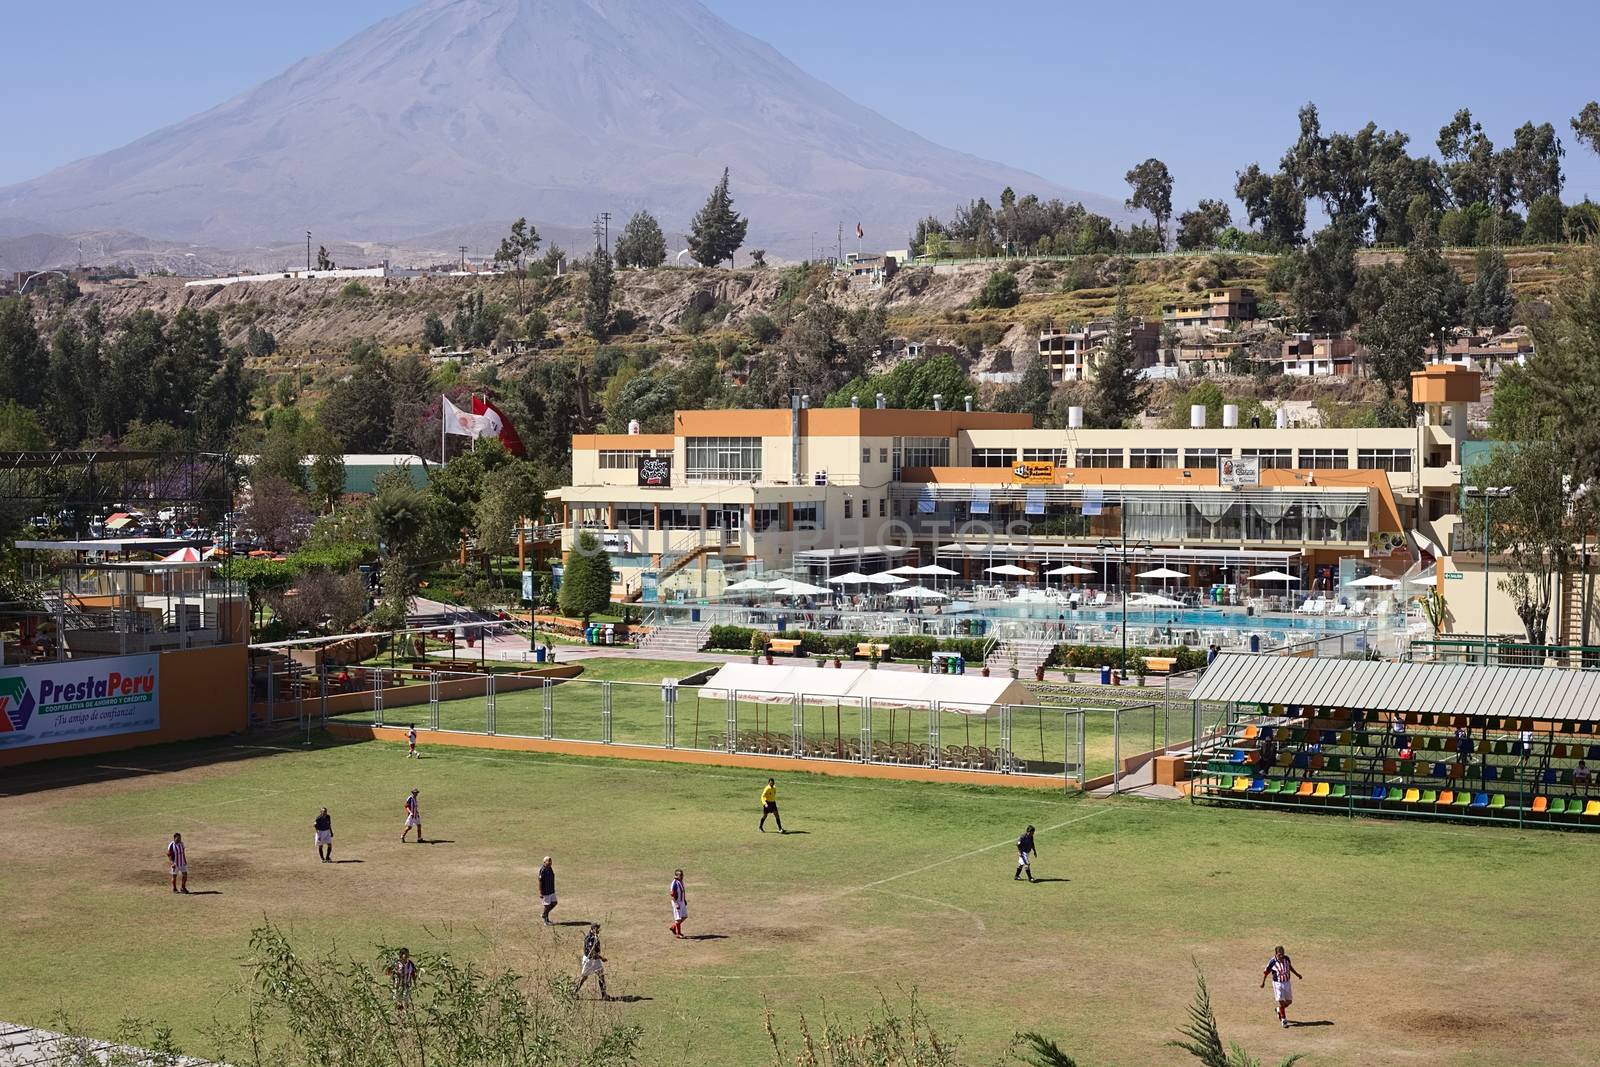 AREQUIPA, PERU - AUGUST 23, 2014: Unidentified men playing football on pitch at the Club Internacional Arequipa (International Country Club) on August 23, 2014 in Arequipa, Peru. In the back the volcano Misti is visible. 